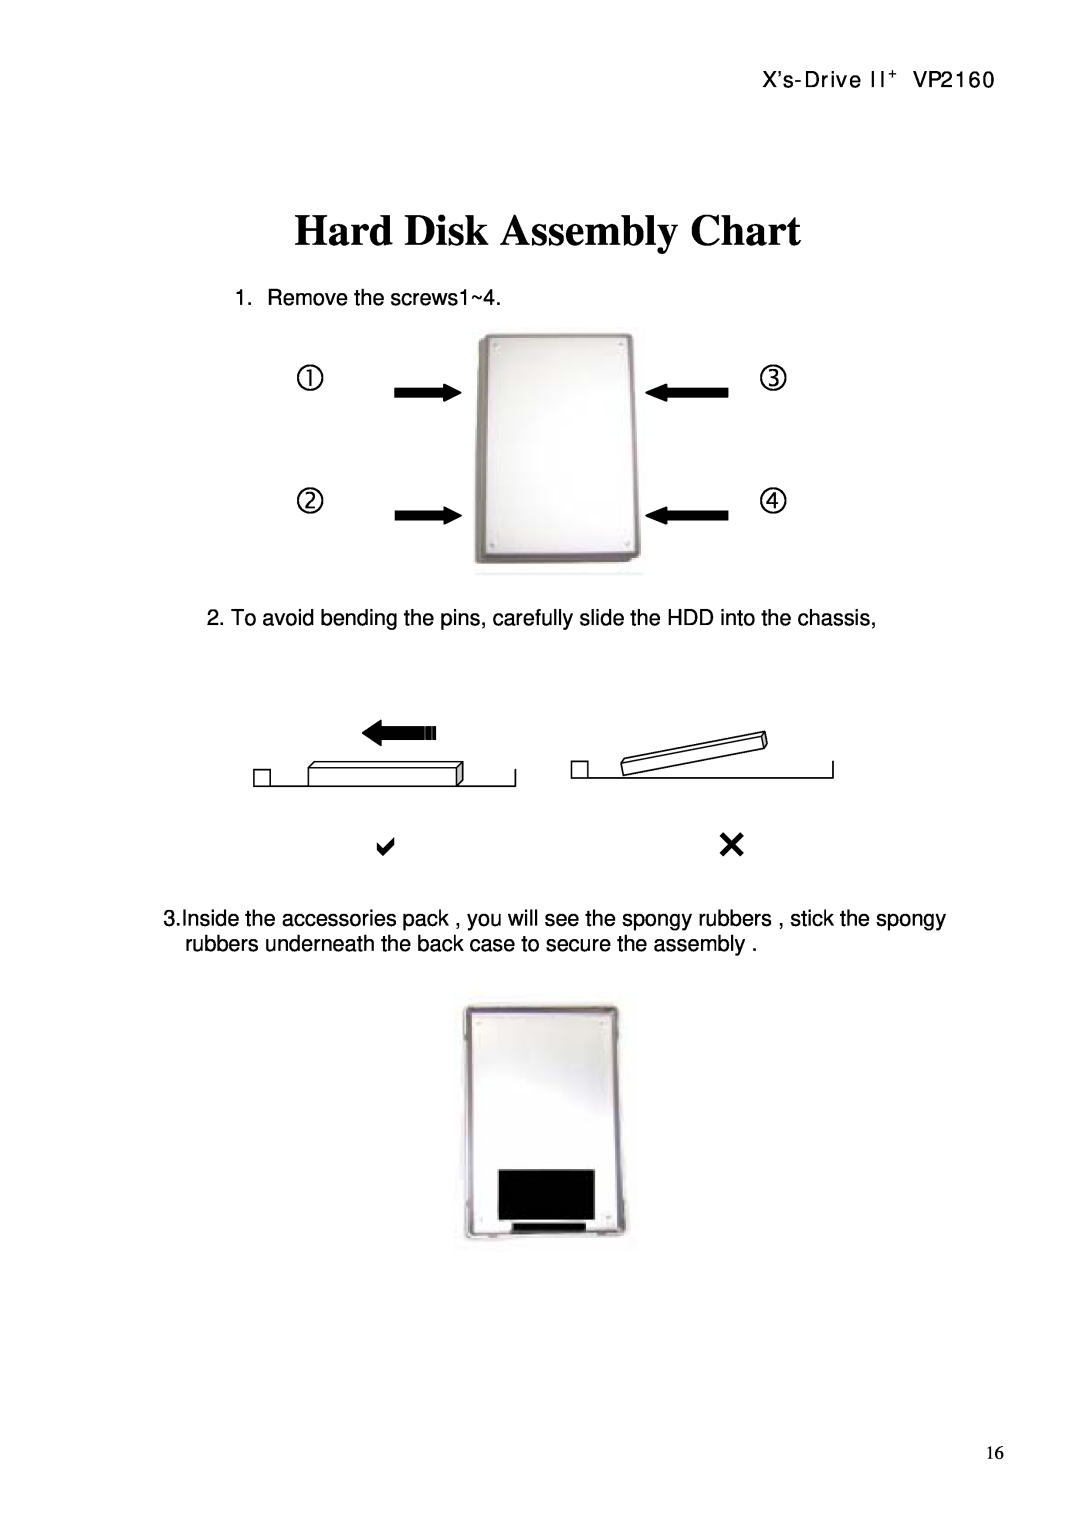 Vosonic manual Hard Disk Assembly Chart, ce df, X’s-Drive II+ VP2160 